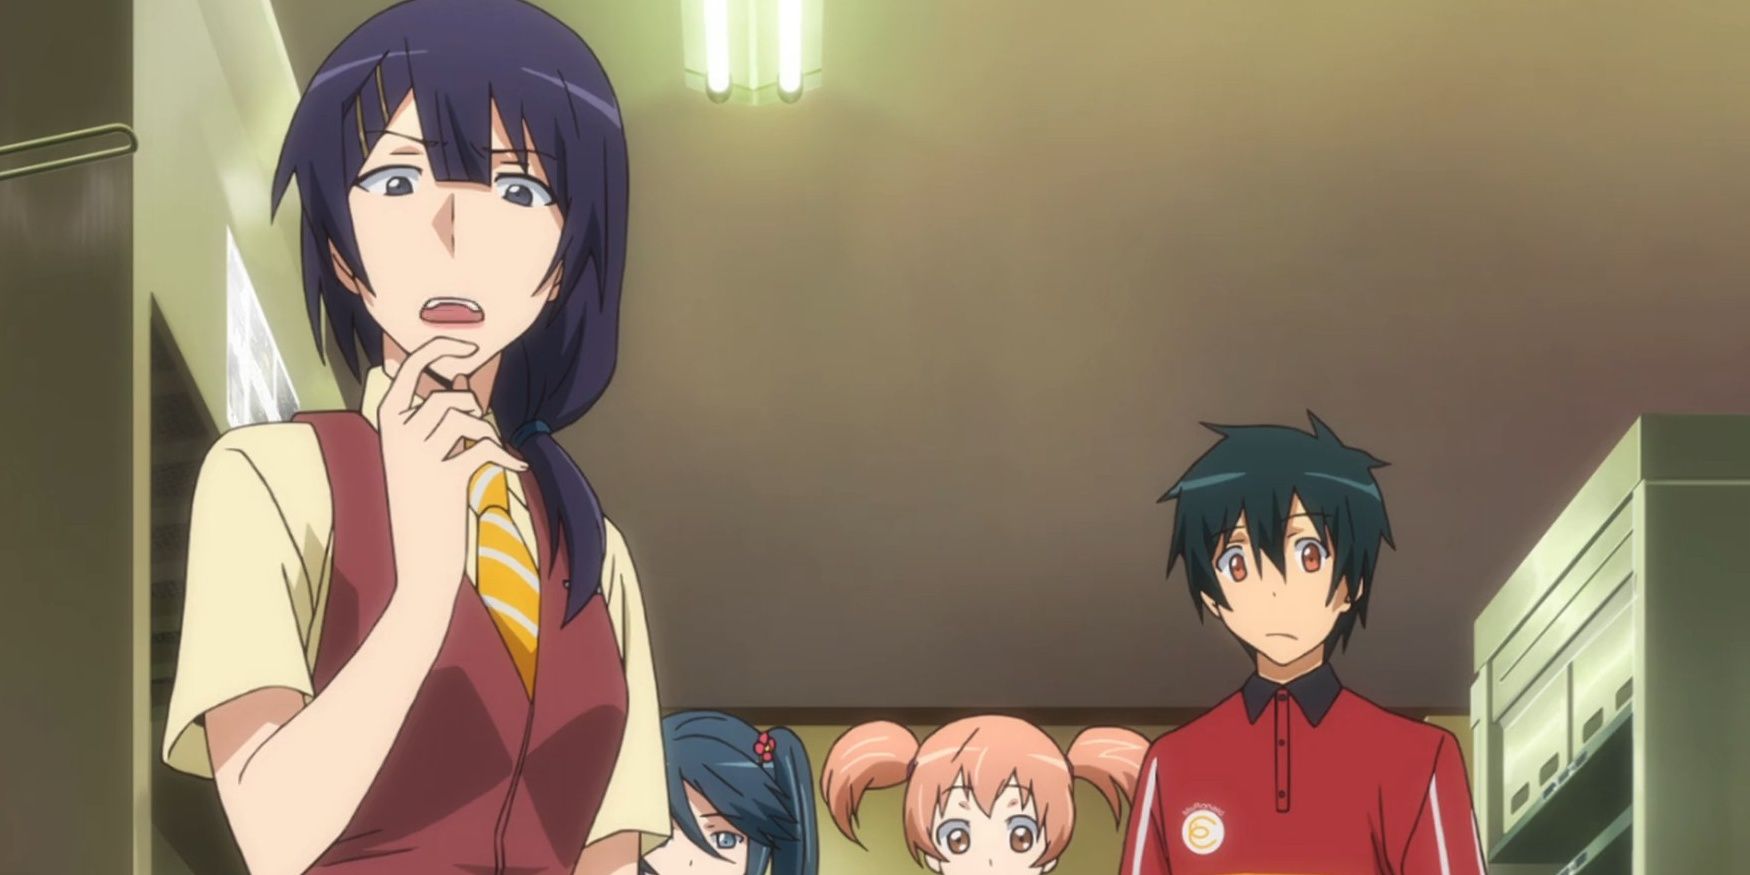 mayumi kisaki in the devil is a part timer Cropped